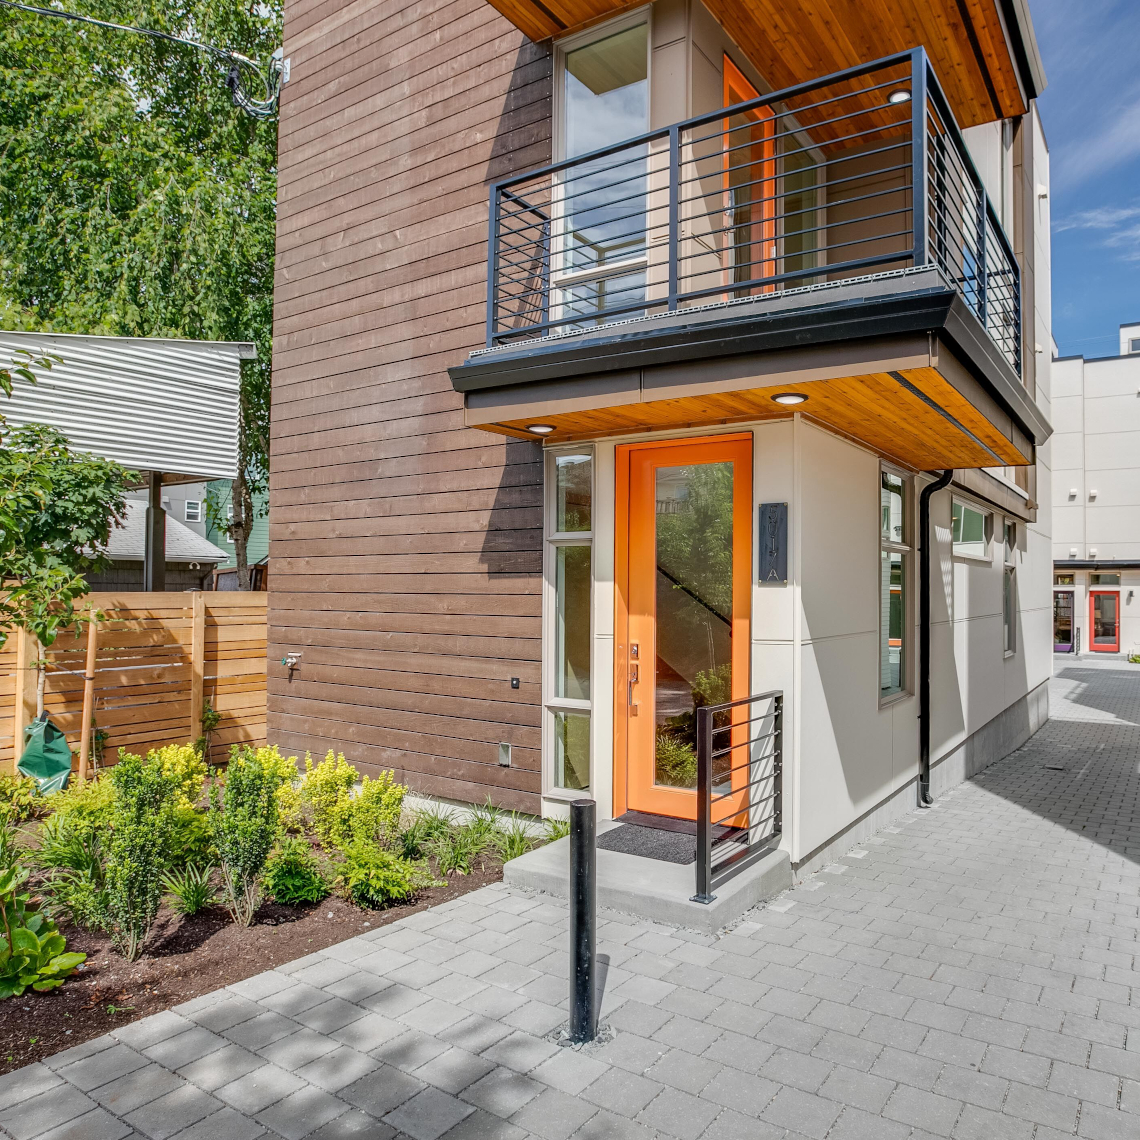 Haberzetle Homes Playful All-Electric 4-Star Townhomes exterior entry and garden